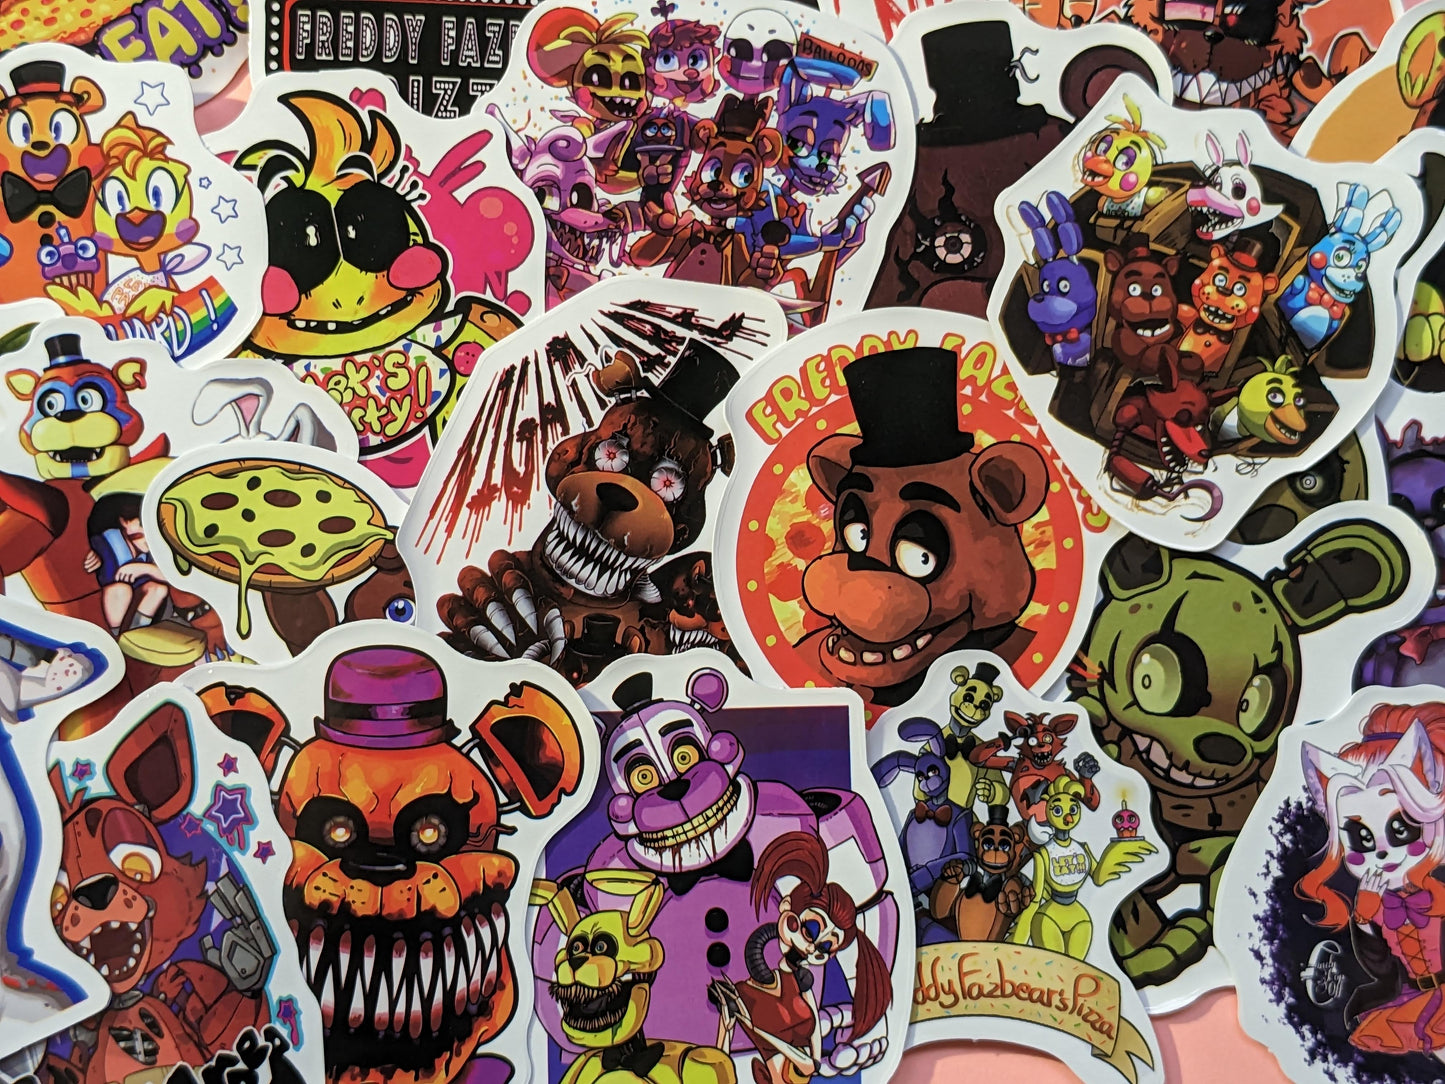 FIVE NIGHTS AT FREDDY'S Sticker Pack - Waterproof Decal Set, Indoor/Outdoor Use, Vivid Video Game Artwork, Retro Style Fun and Scary Gift Set - Asylum Books